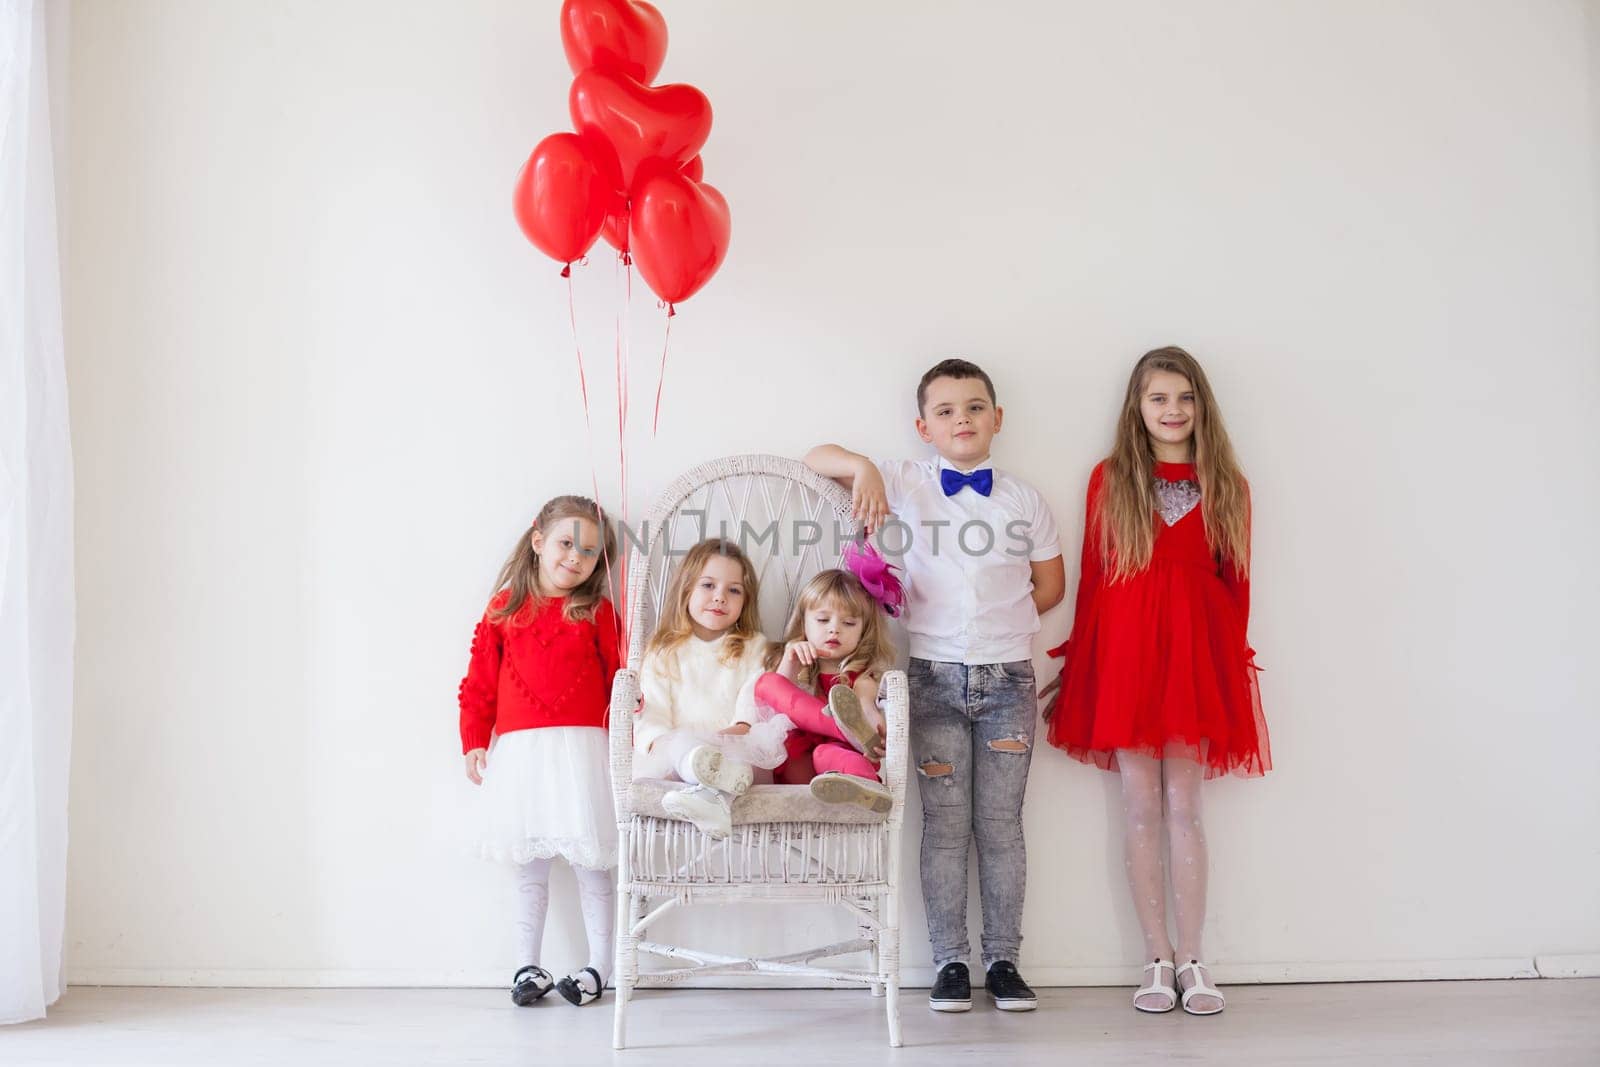 Kids with red balloons for birthday in the interior by Simakov